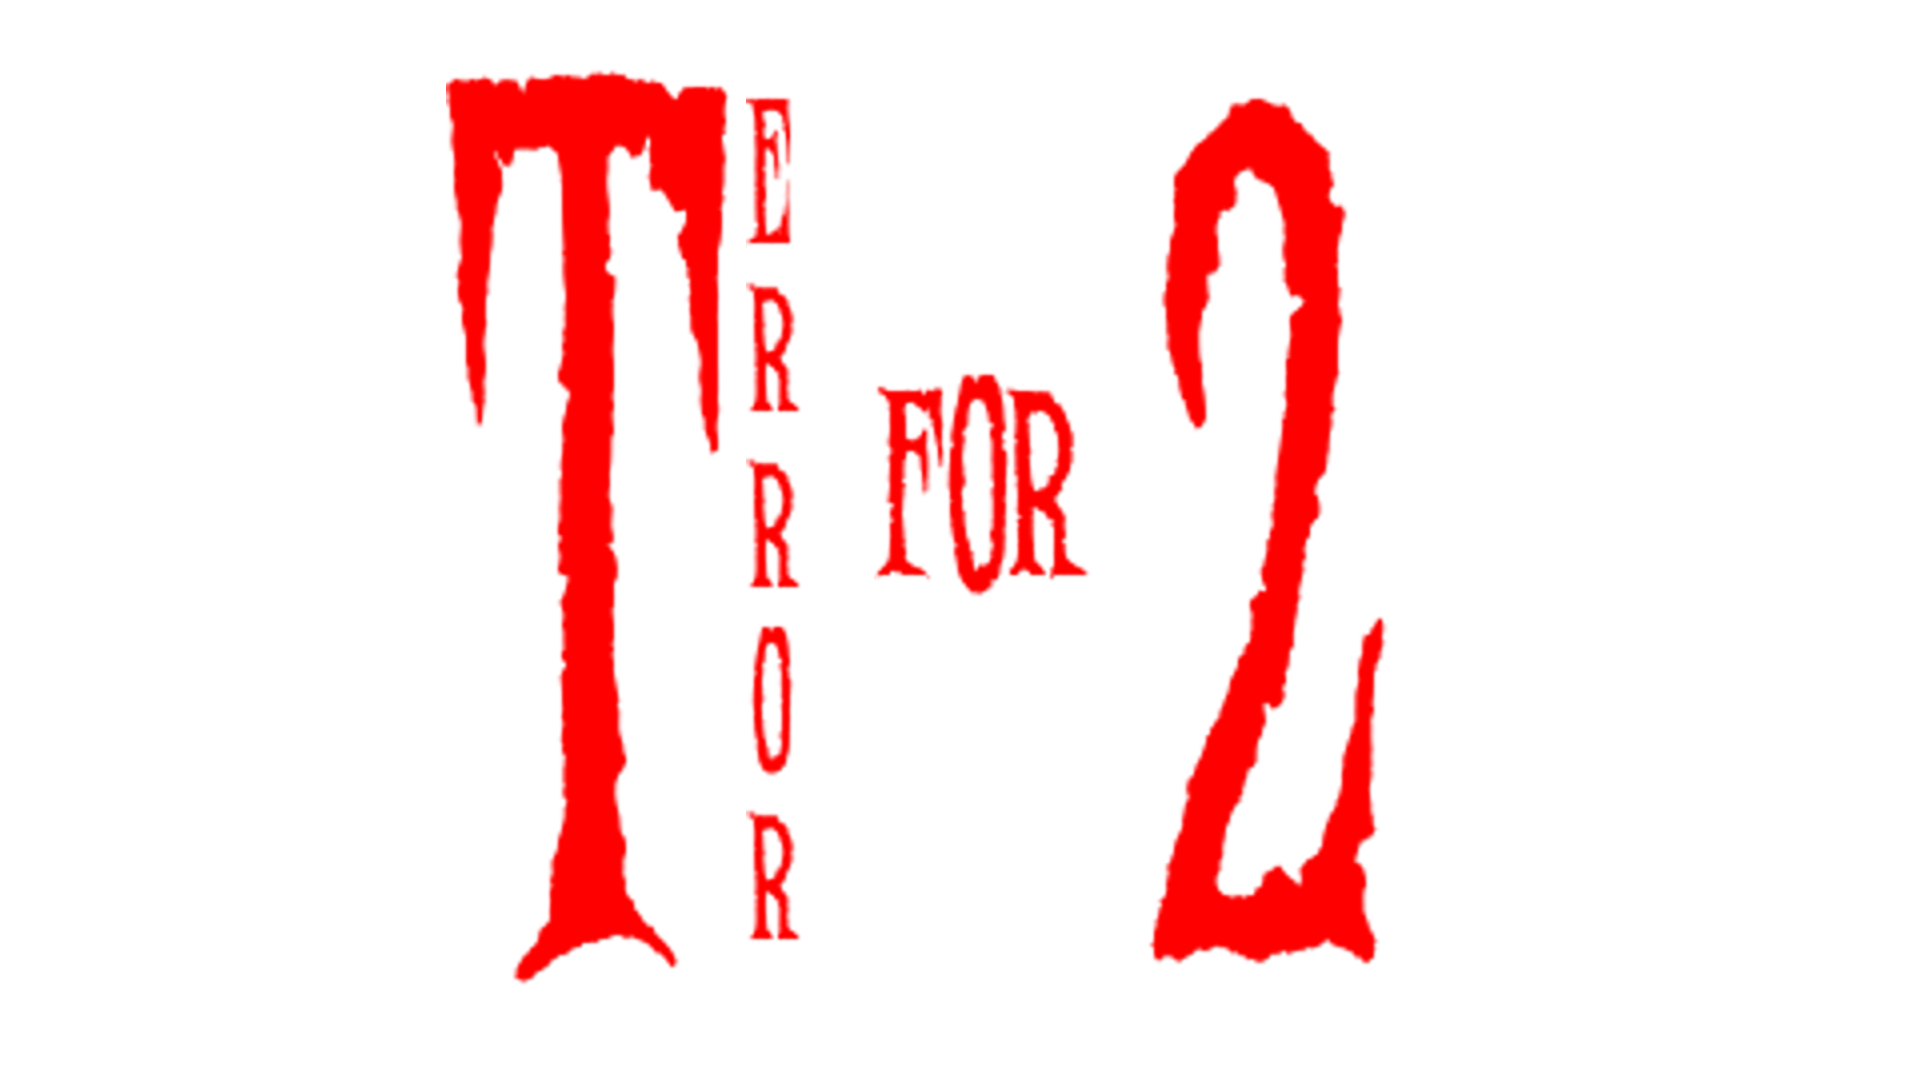 Terror for Two